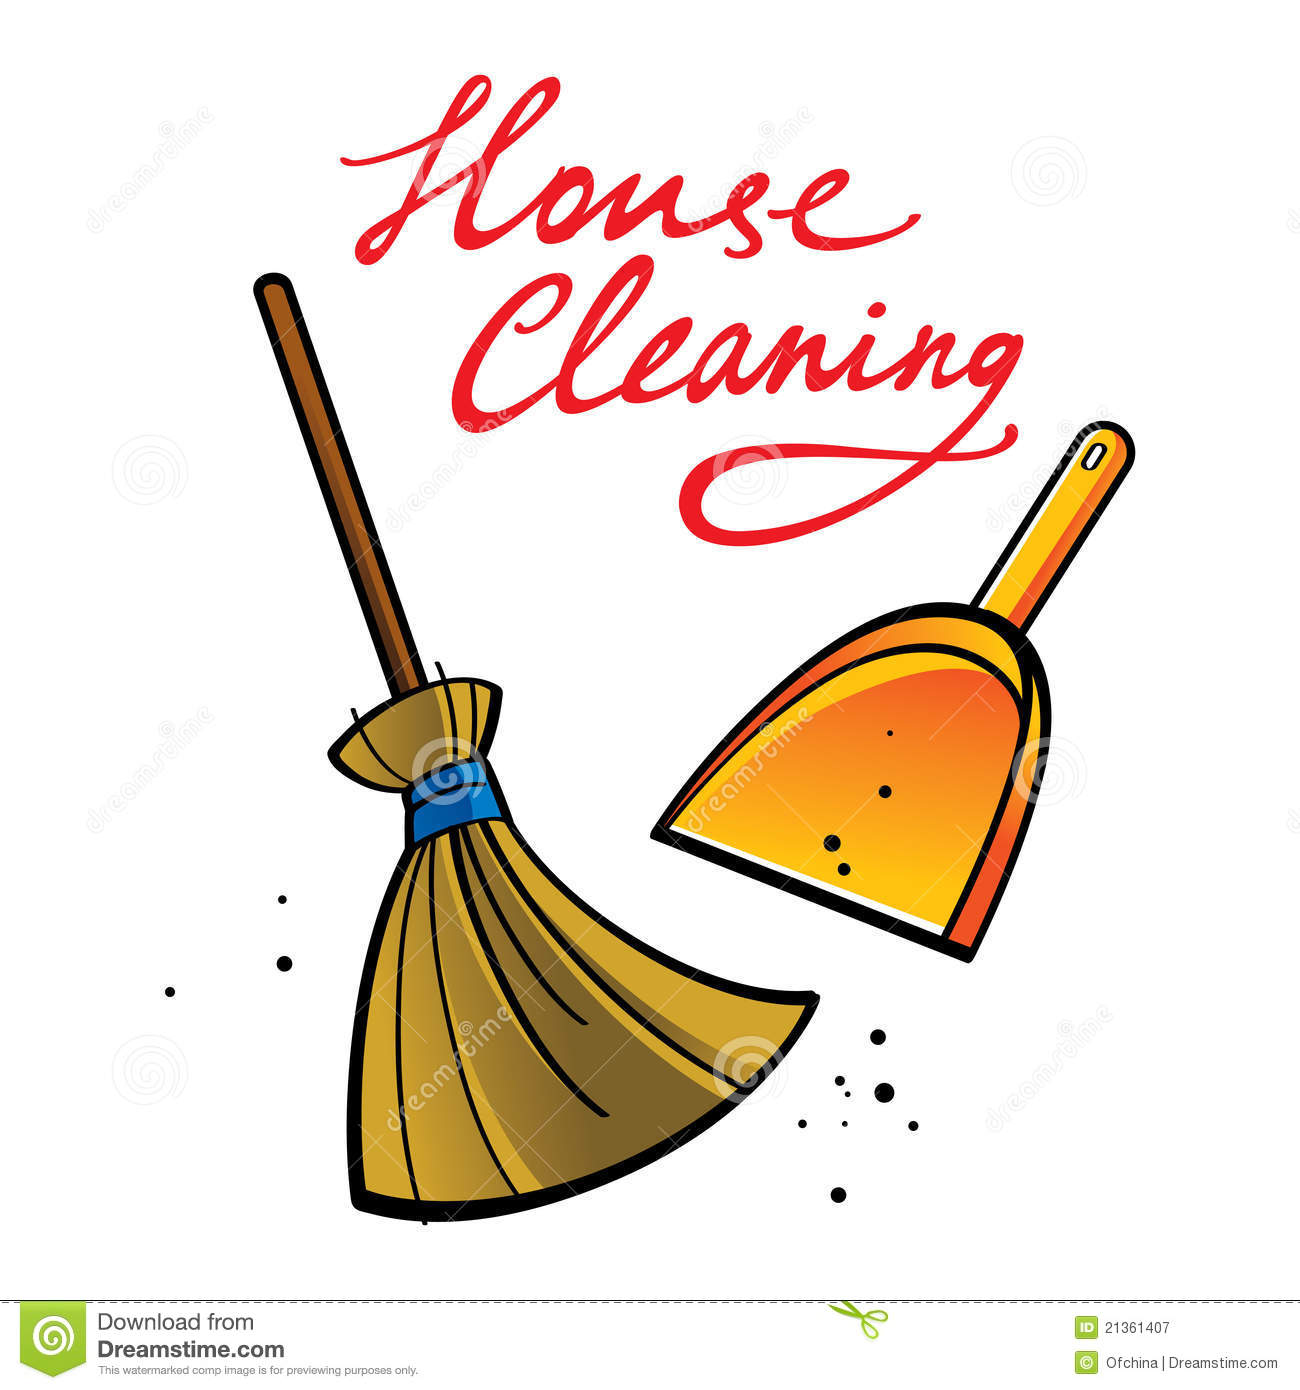 House Cleaning Clip Art Free Download - megahaircomestilo